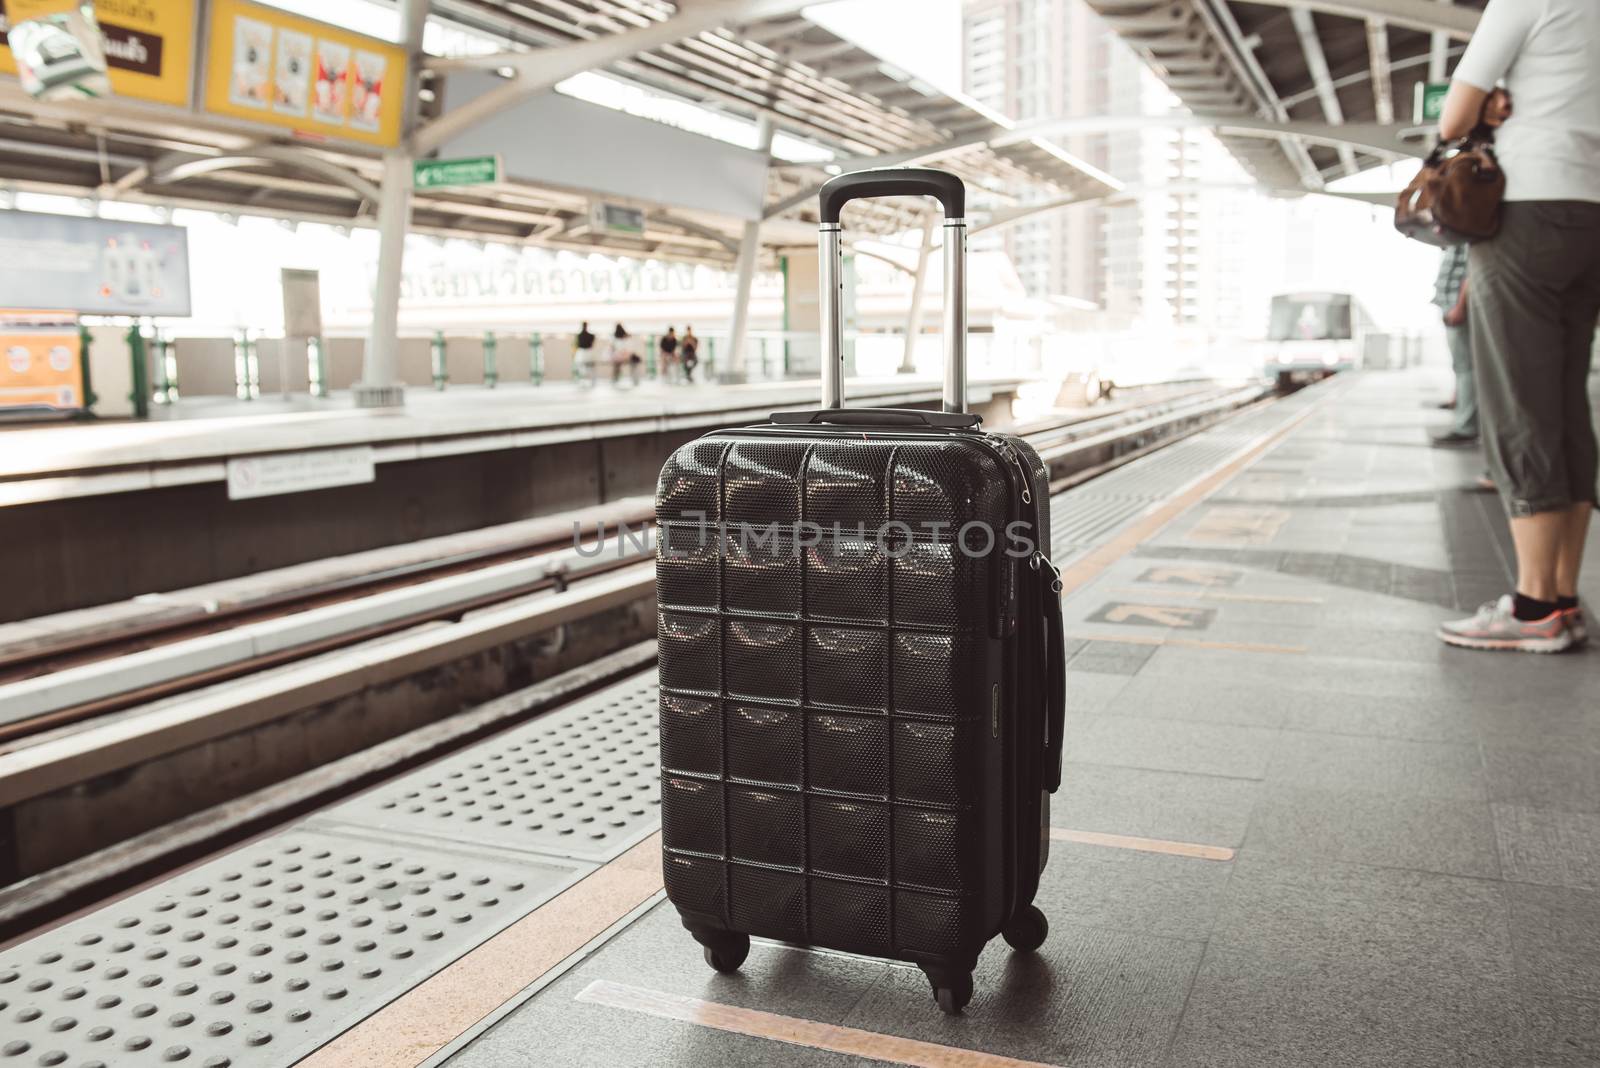 Black luggage waiting train in a station